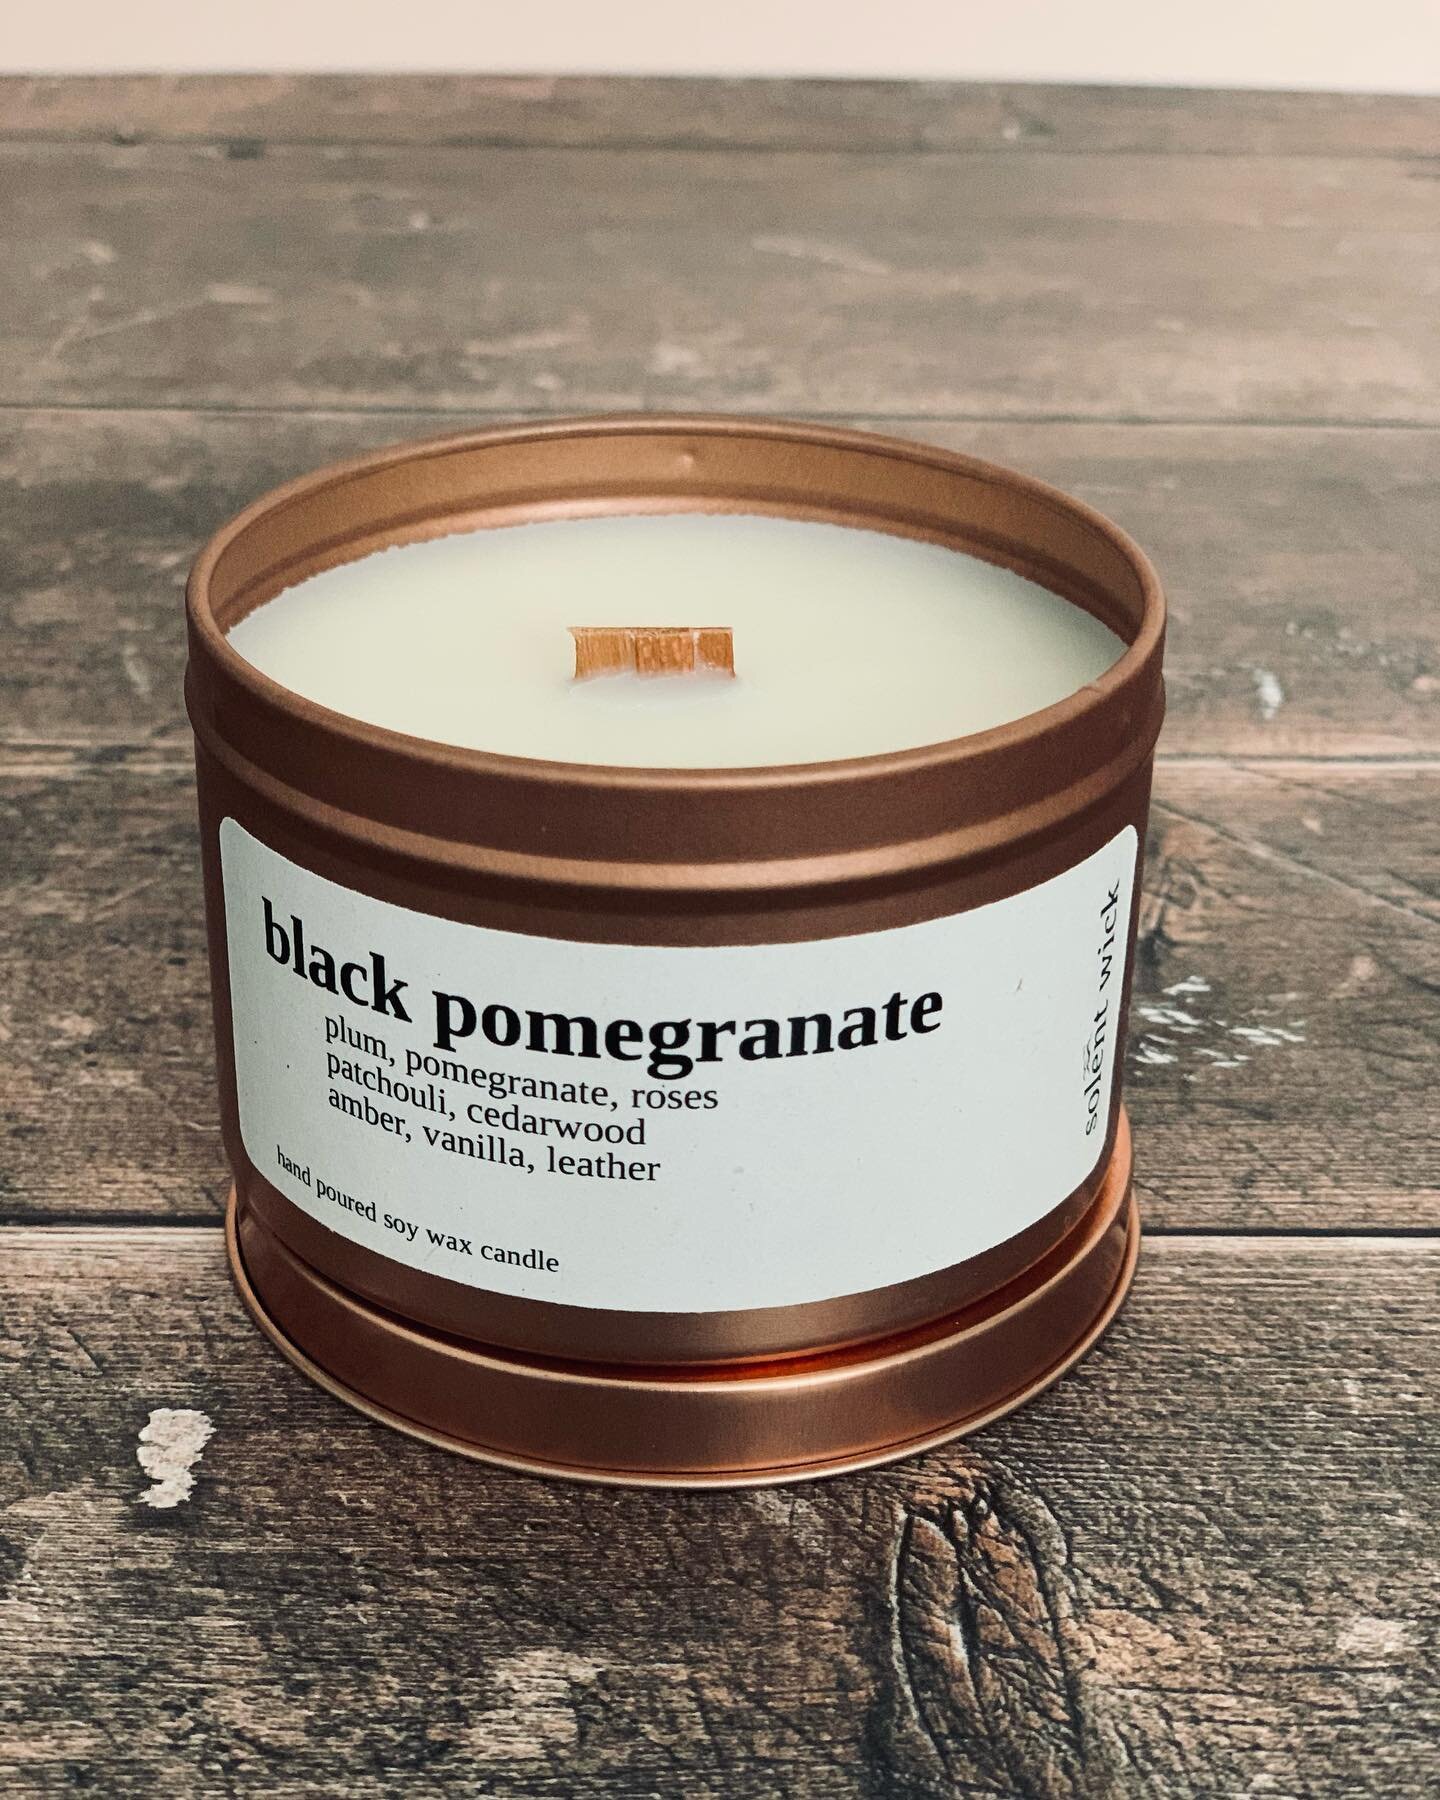 The OG of solent wick!

Did you know that black pomegranate is one of our most popular scents?! 

We just can&rsquo;t get enough of it and it&rsquo;s exactly what our customers say! 

Hands up if you agree 🙋🏻&zwj;♀️🙋🏻

.
.
.

#pomegranate #bestse